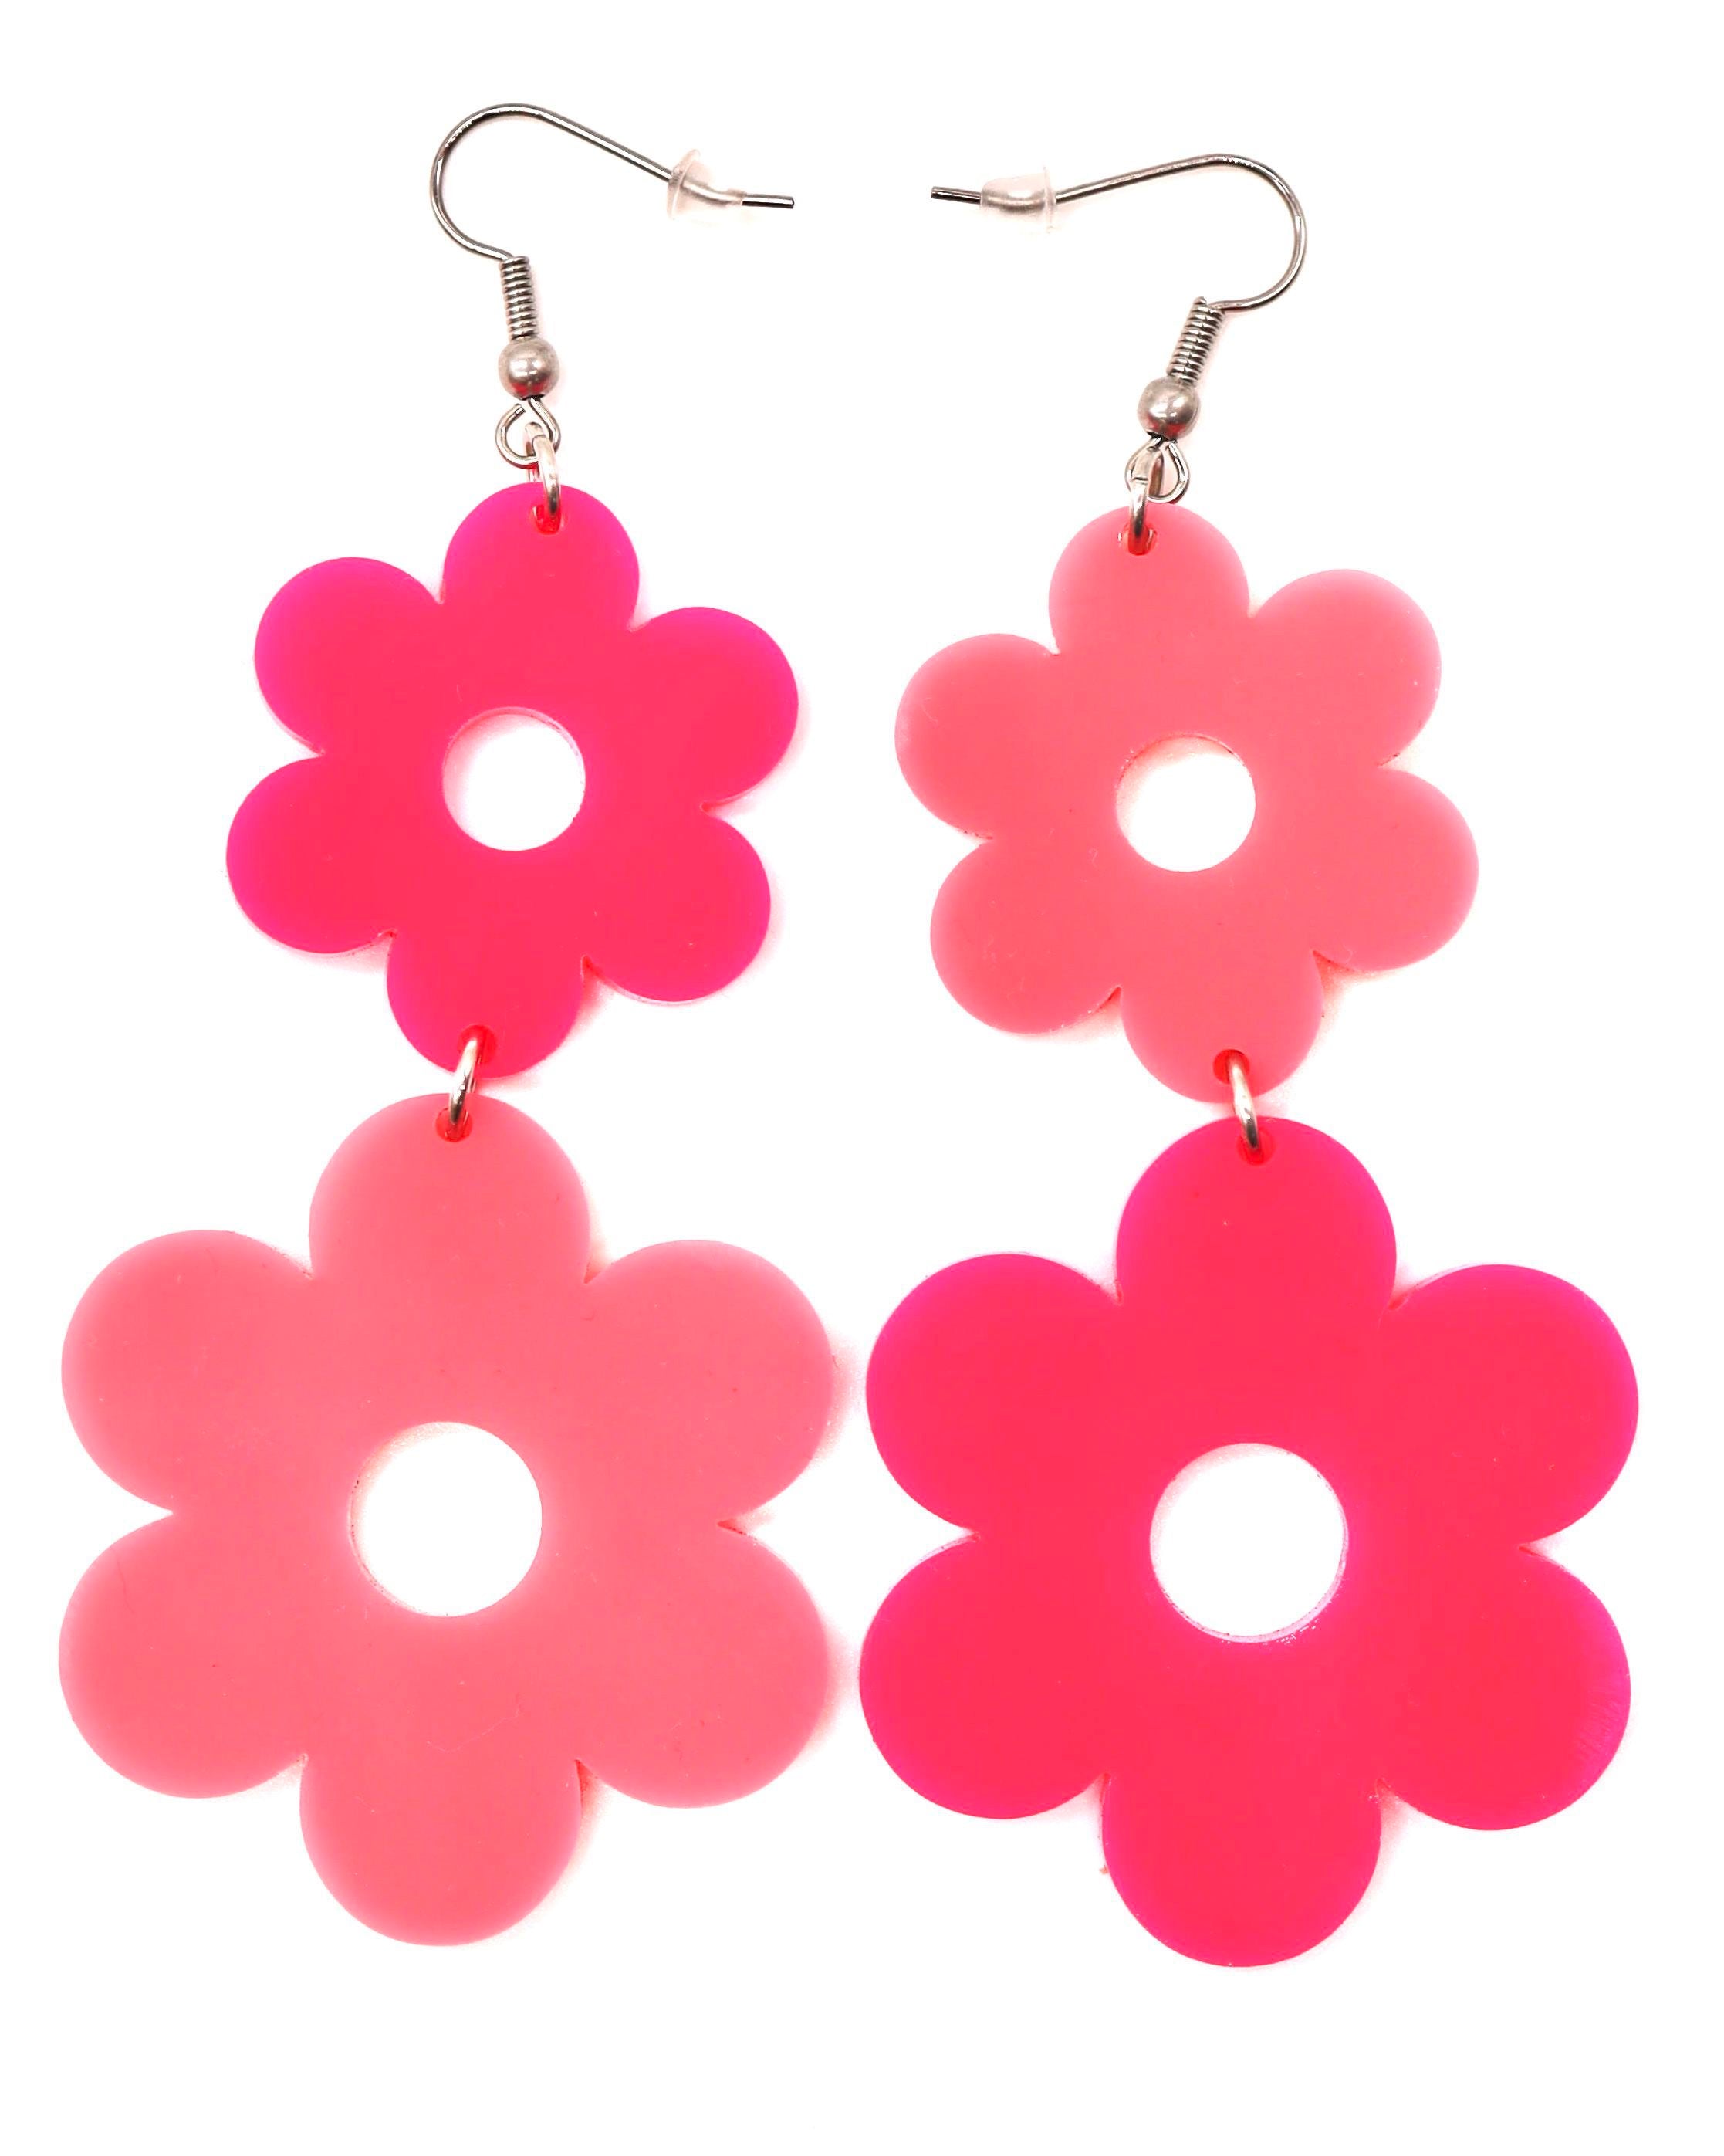 A pair of Flower Power Earrings with alternating pink colored flowers, featuring a smaller flower on top and a larger flower on the bottom.